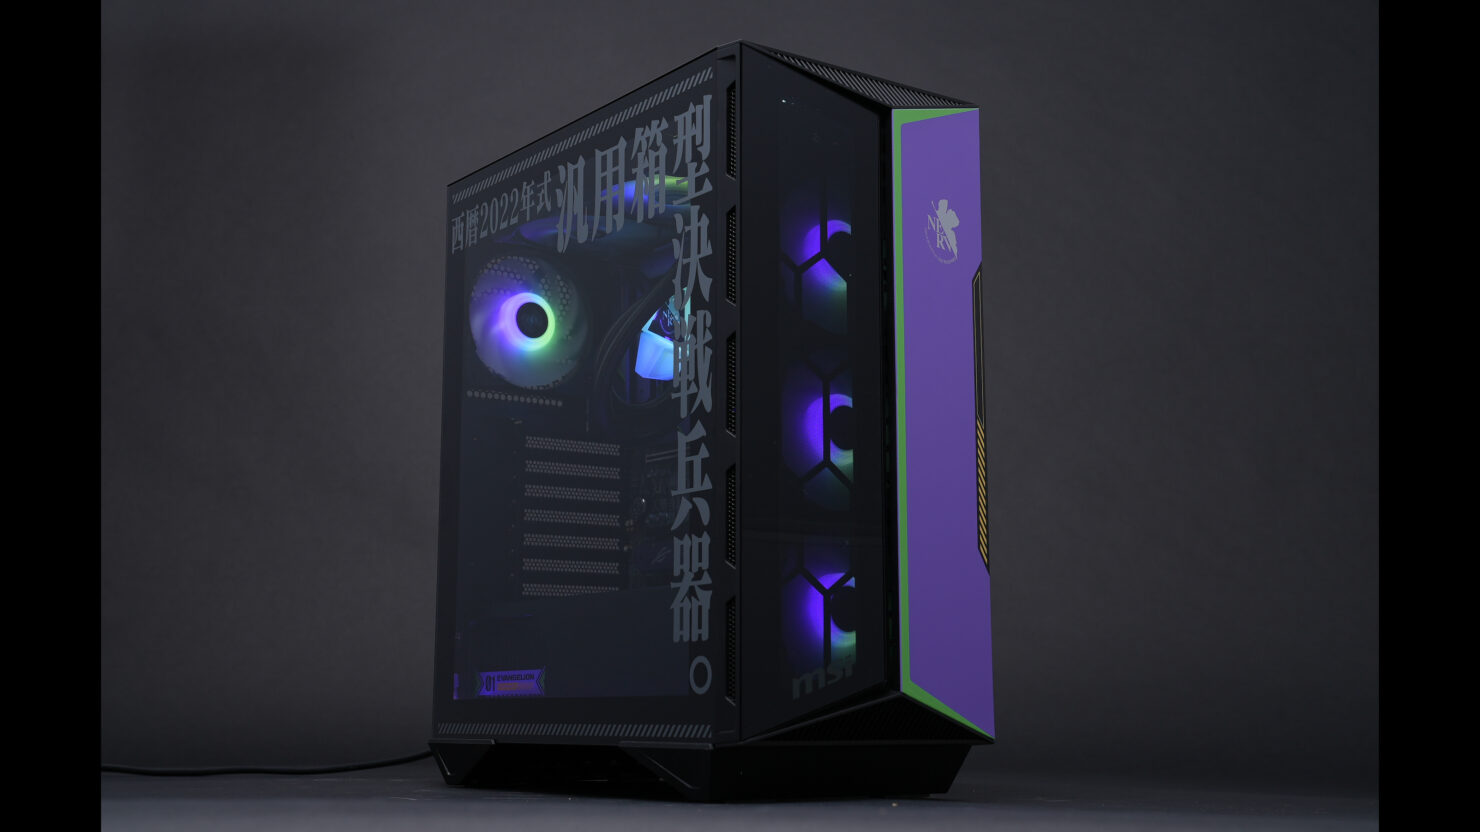 msi-unveils-neon-genesis-evangelion-anime-inspired-pc-components-cases-motherboards-psus-aio-coolers-_2